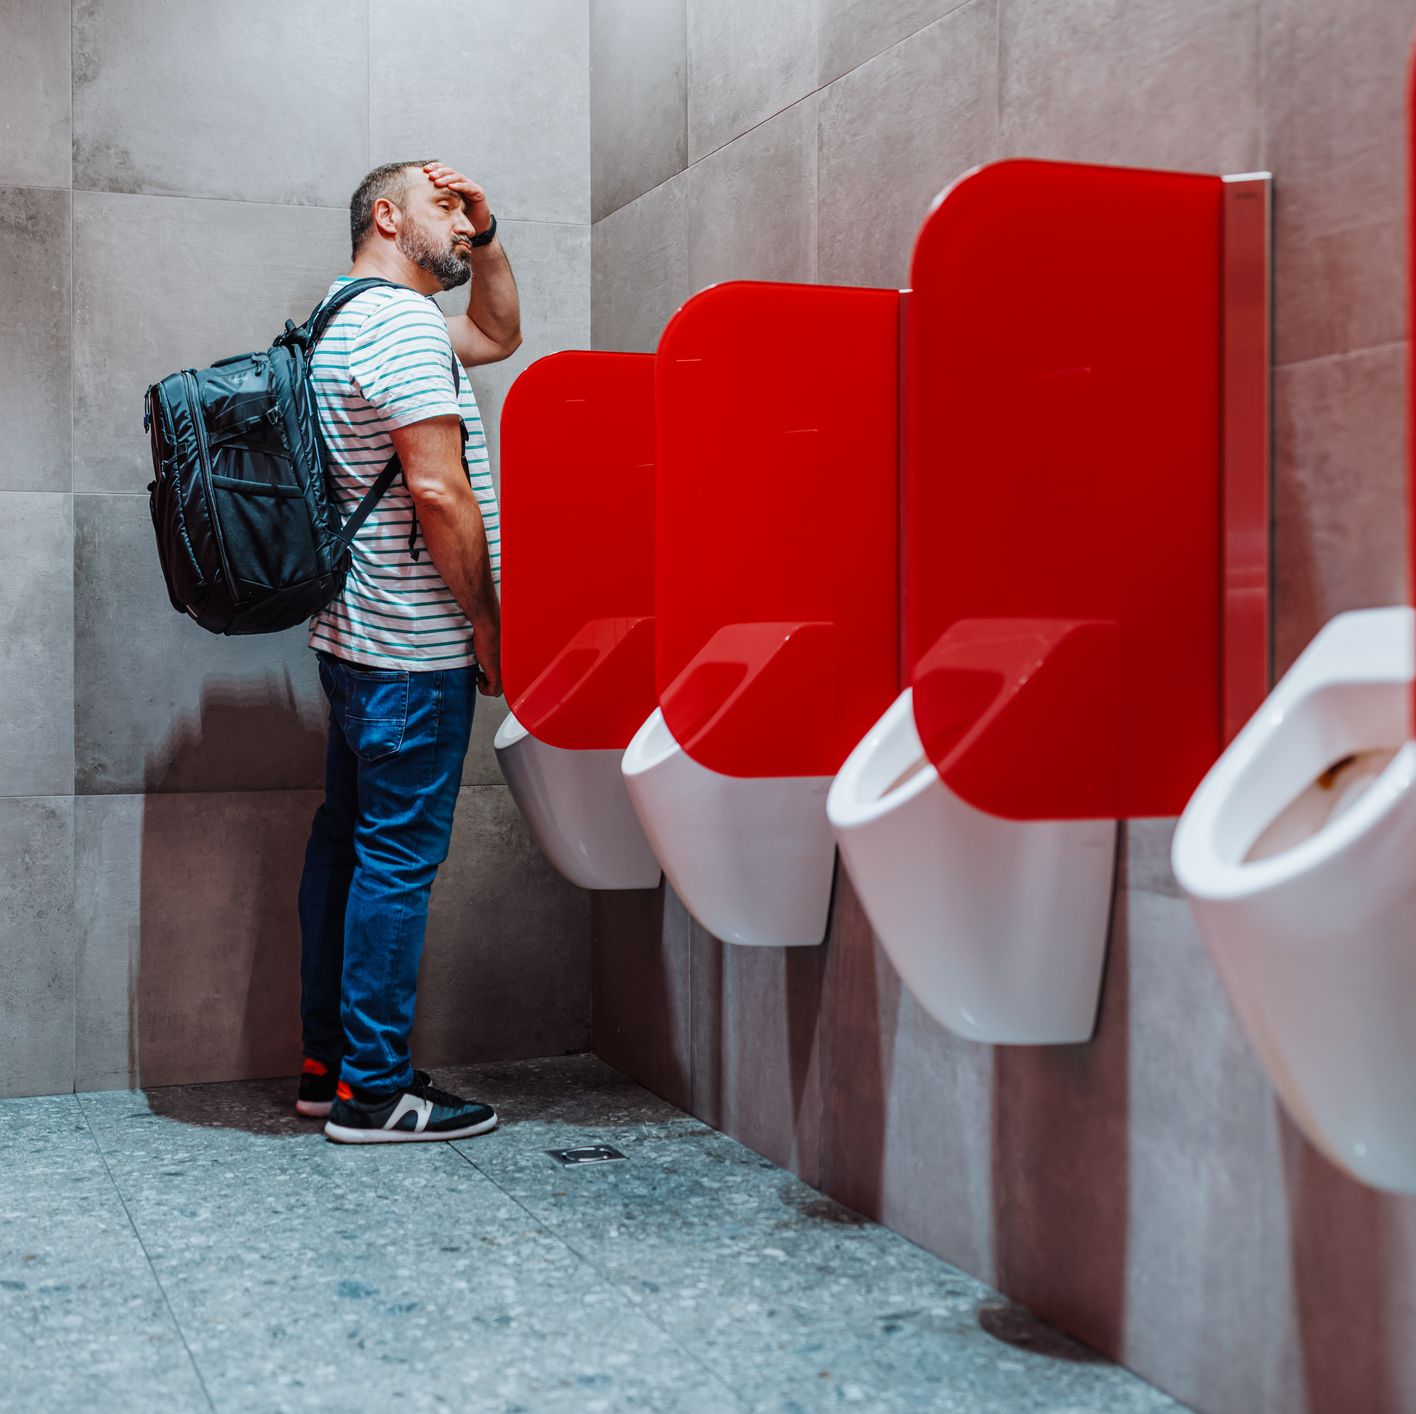 A Urologist Explains How You Can Pee When You Have a Boner